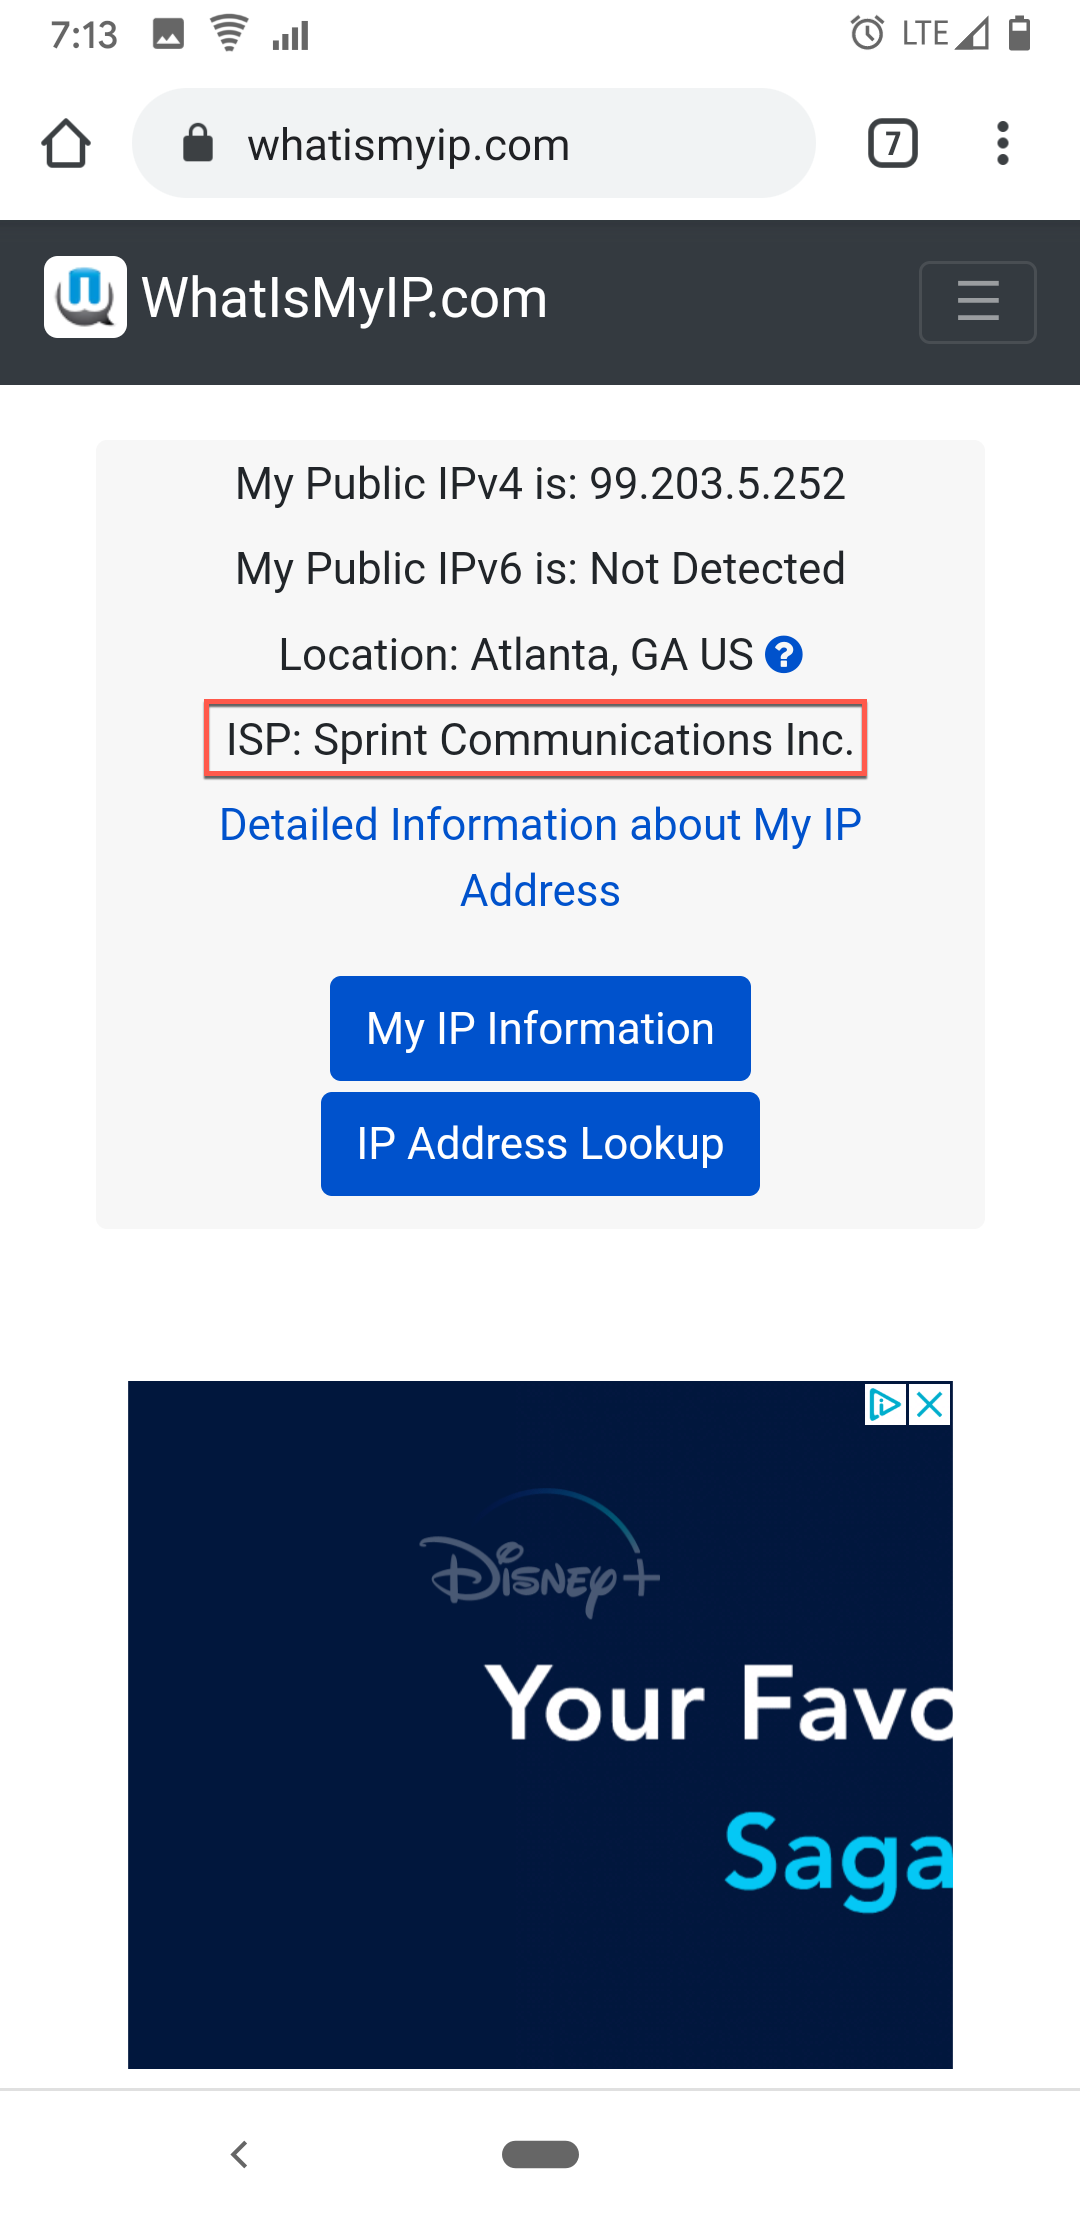 Using WhatIsMyIp.com verify which cellular network we're using for Internet access